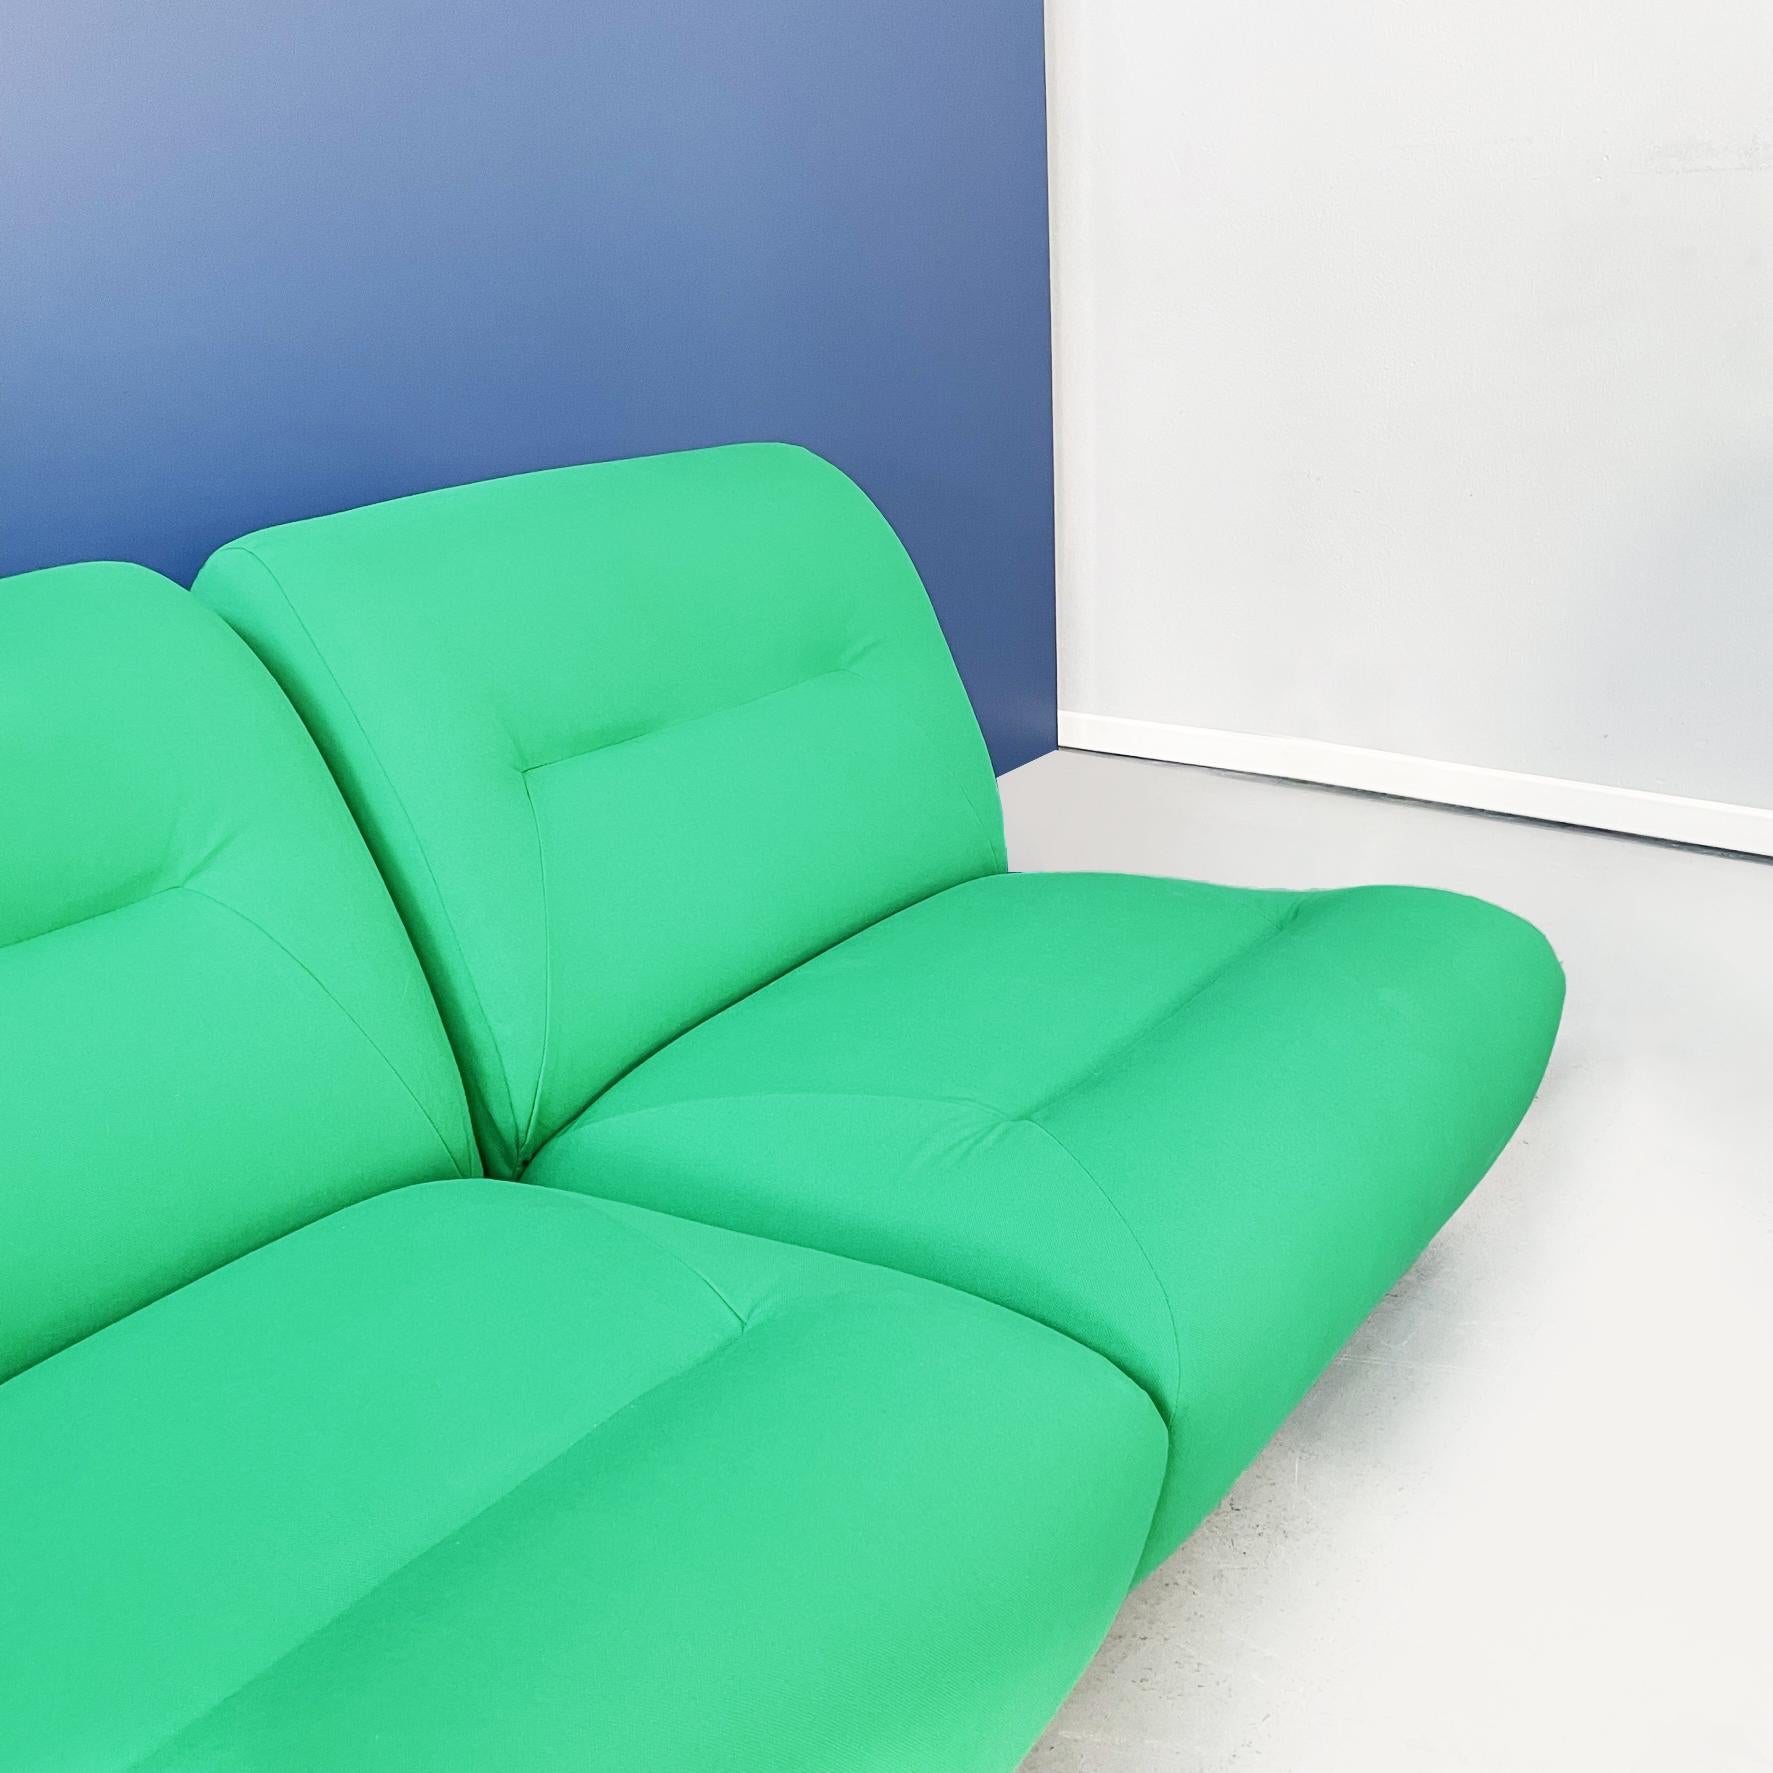 Italian Space Age Modular Sofa in Green Fabric with Metal Insert, 1970s For Sale 4